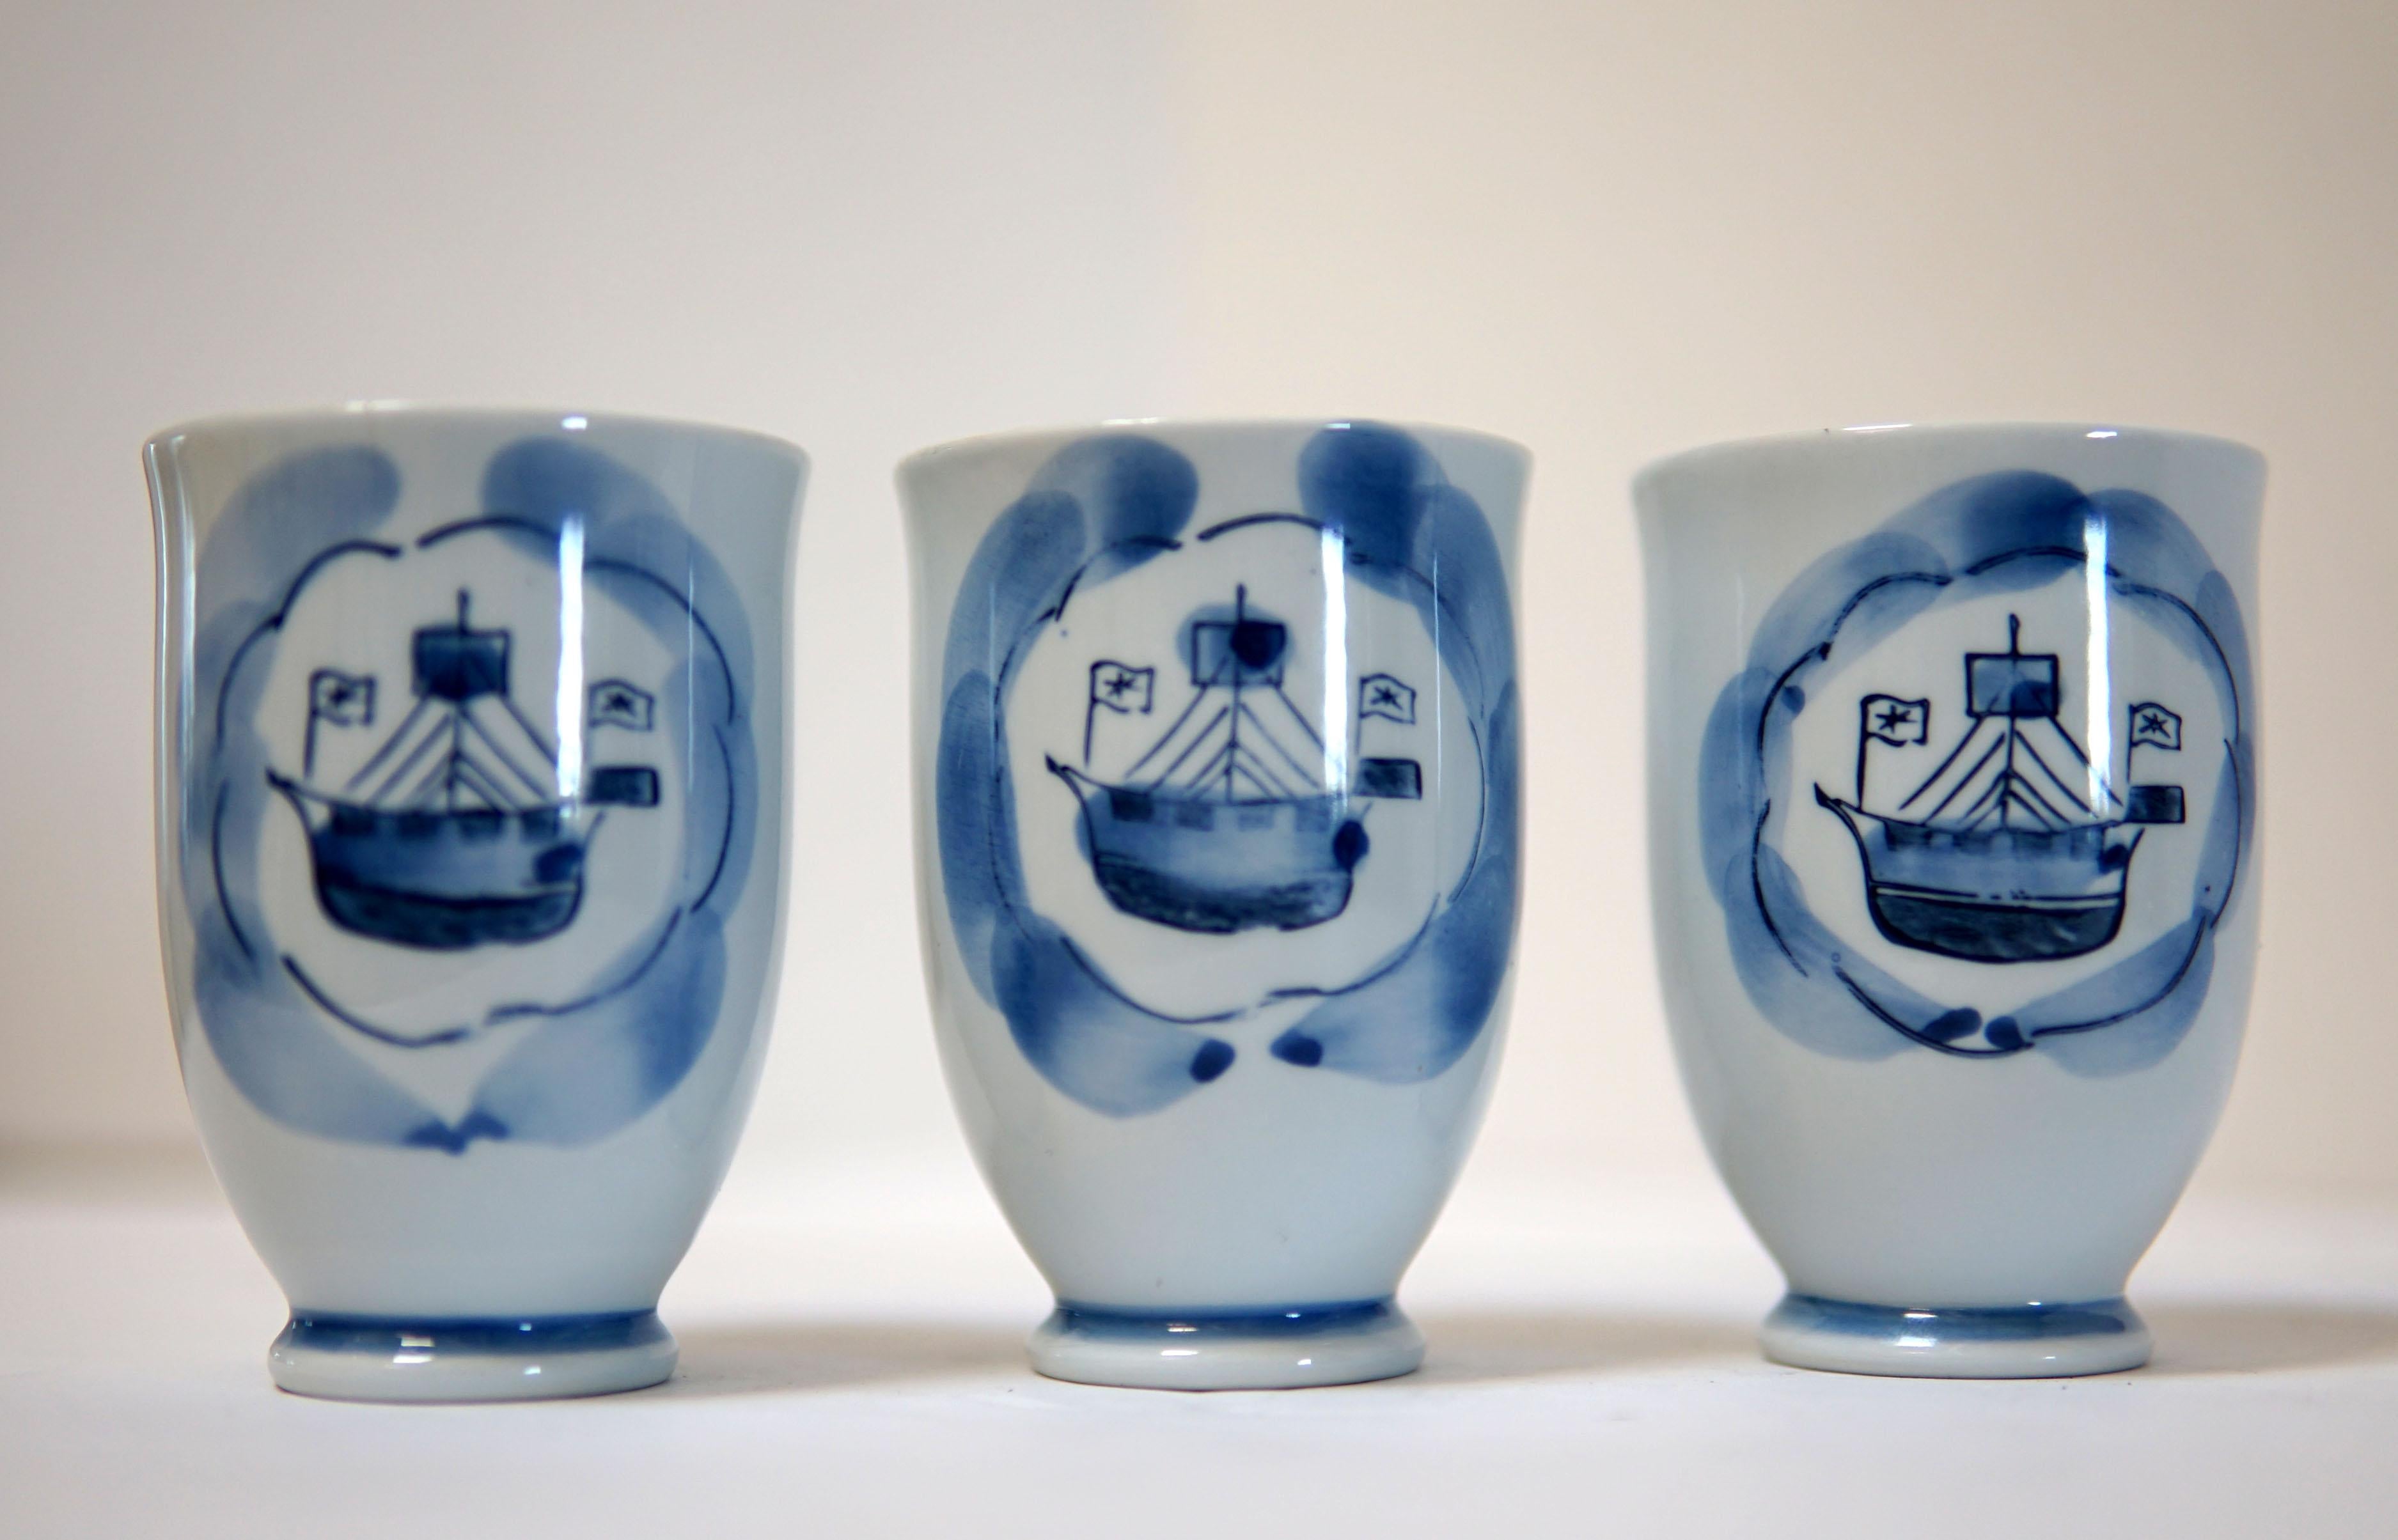 Yi Feng Studio Blue and White Porcelain Tea Cups Nautical Hand Painted Theme In Good Condition For Sale In Lomita, CA